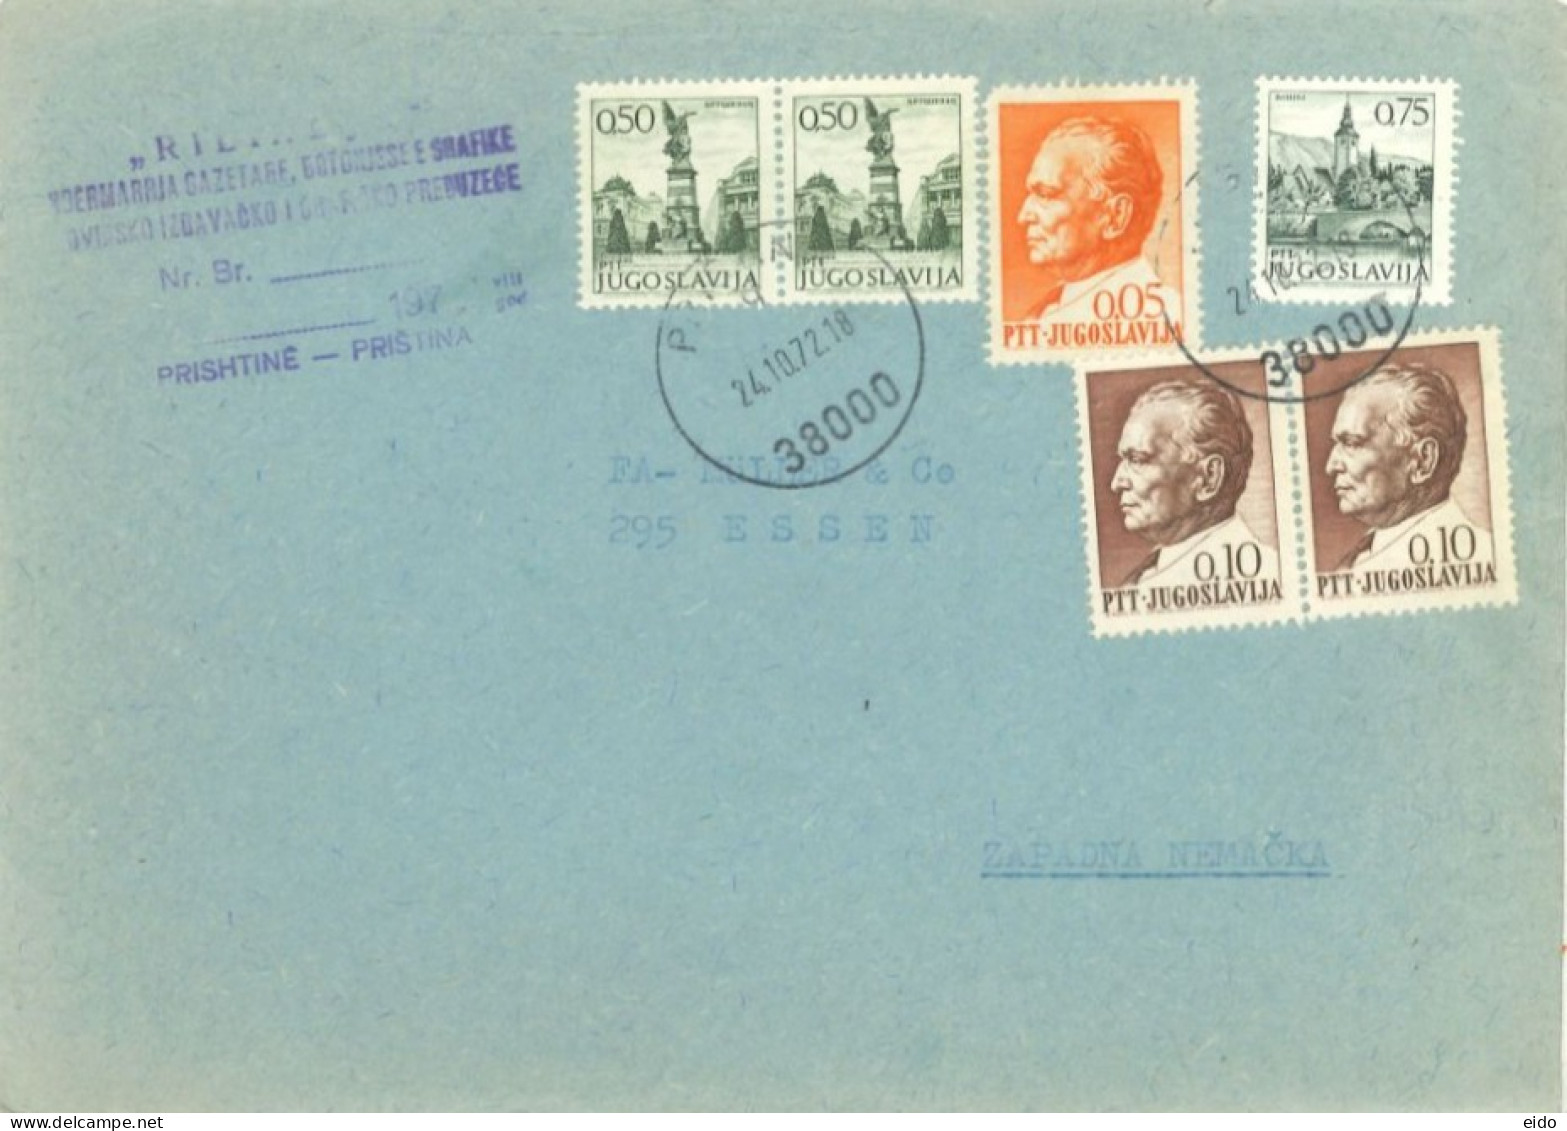 YUGOSLAVIA  - 1972, STAMPS COVER TO GERMANY. - Covers & Documents